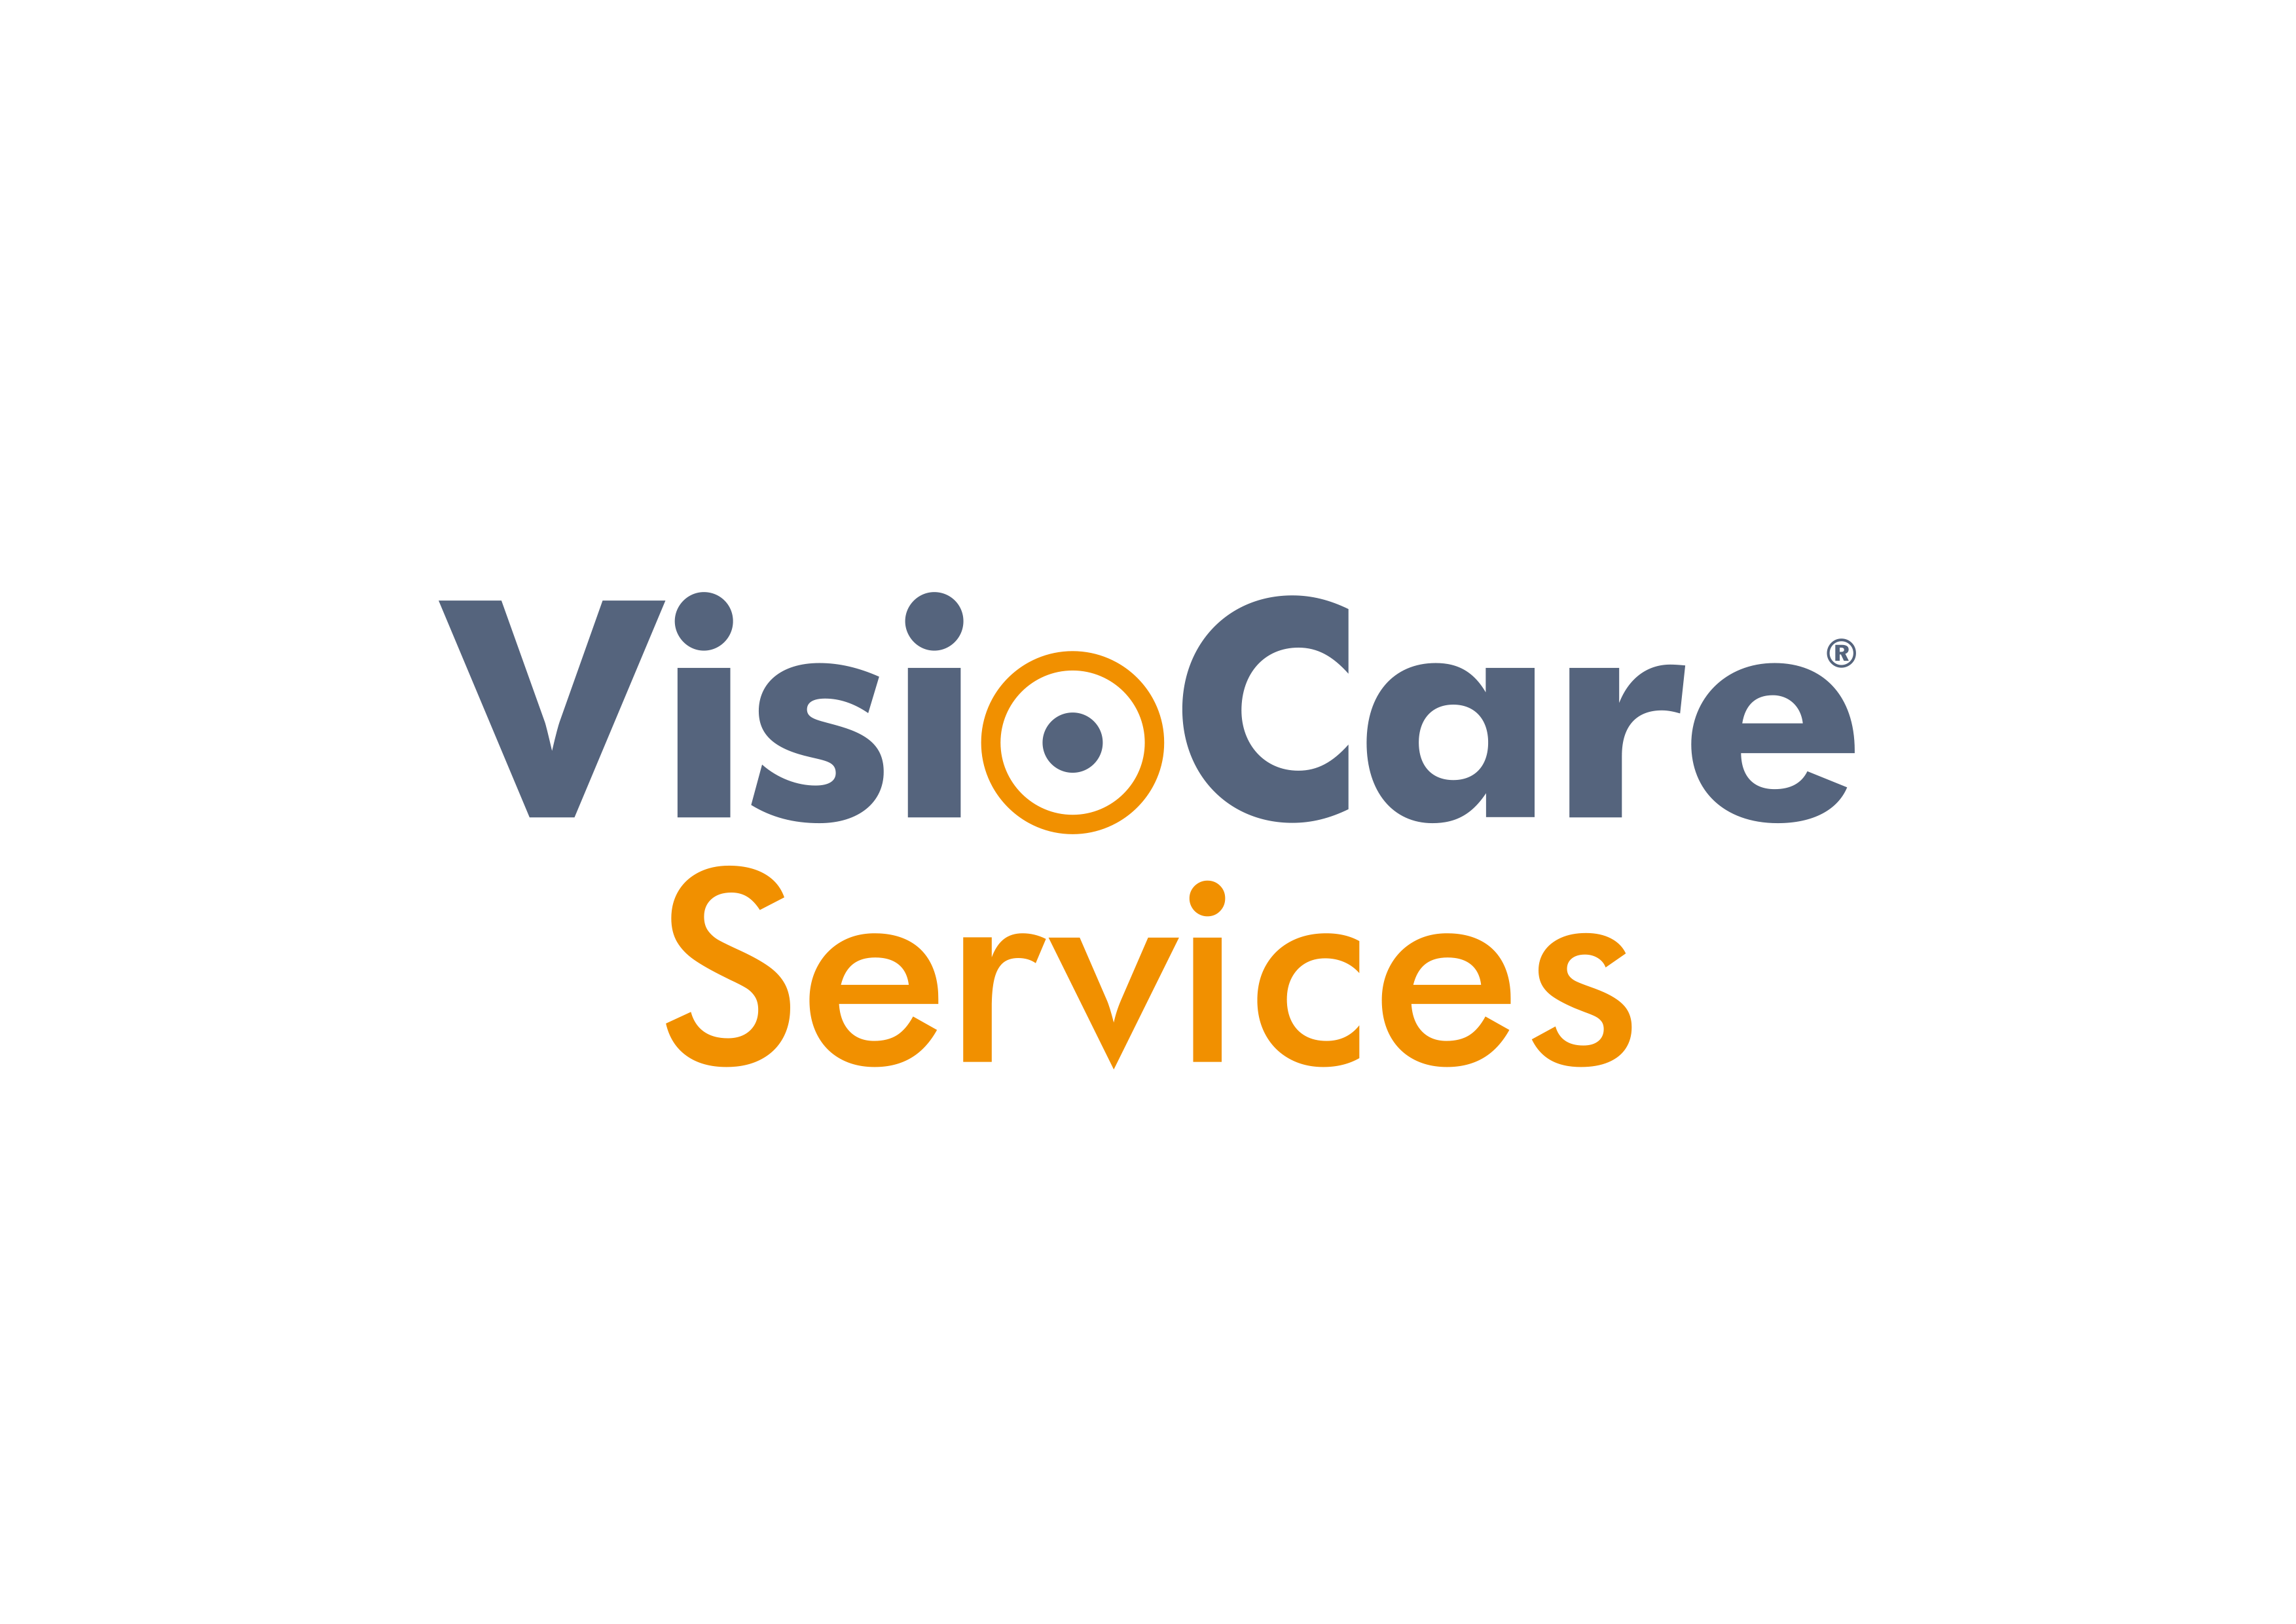 VisiocareServices_RGB.png